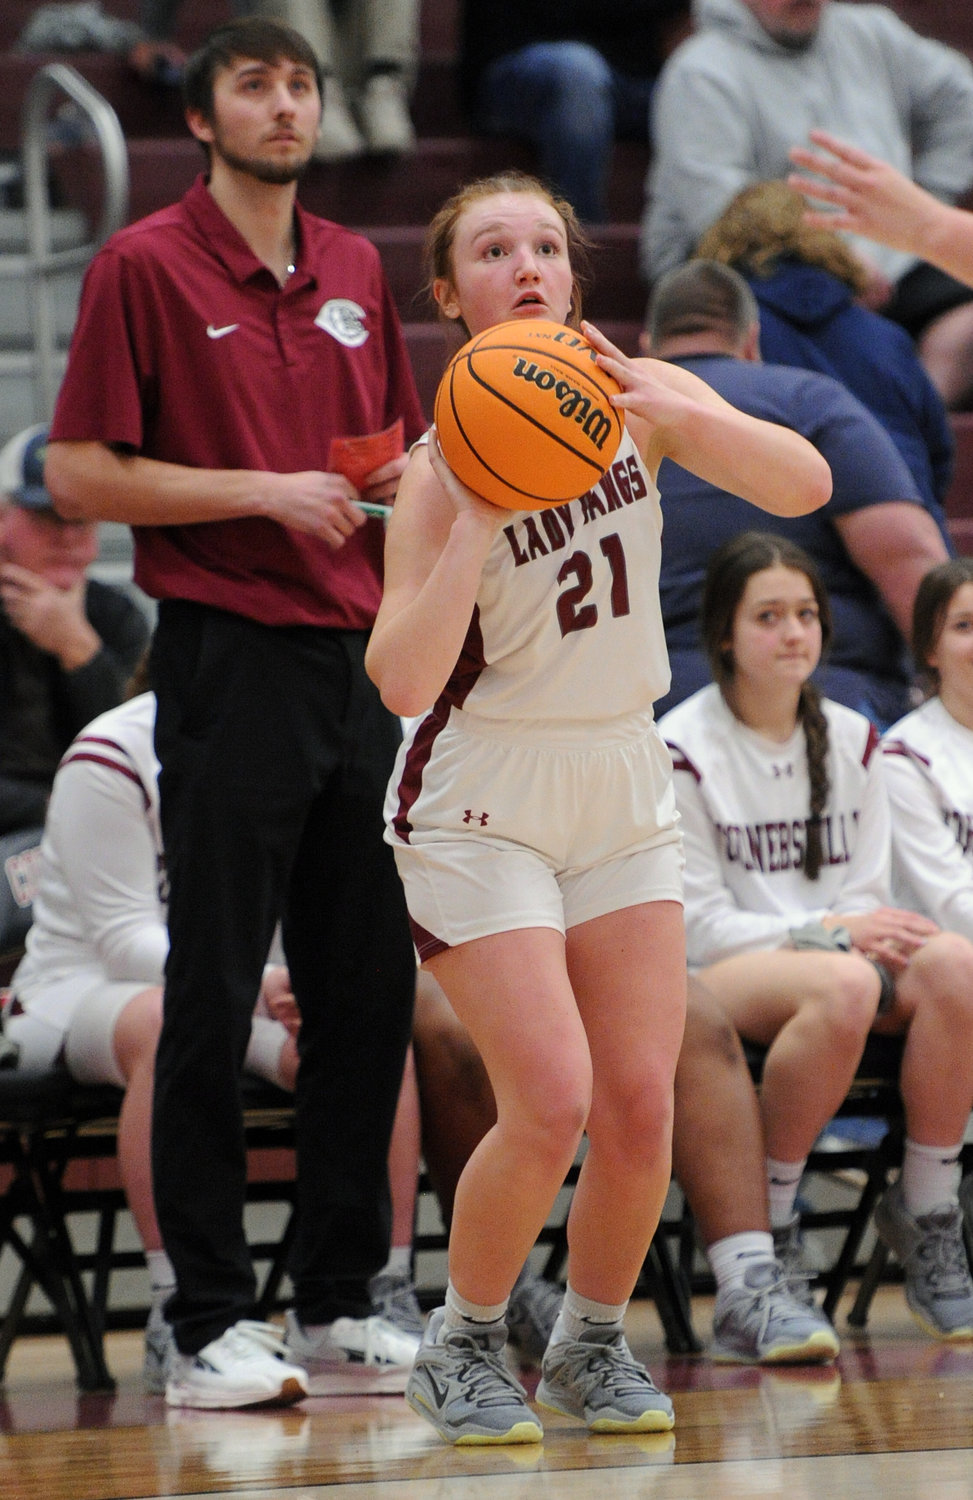 Anna Wood steps back and drills a corner three-pointer in the second half against Huntland on Tuesday night.